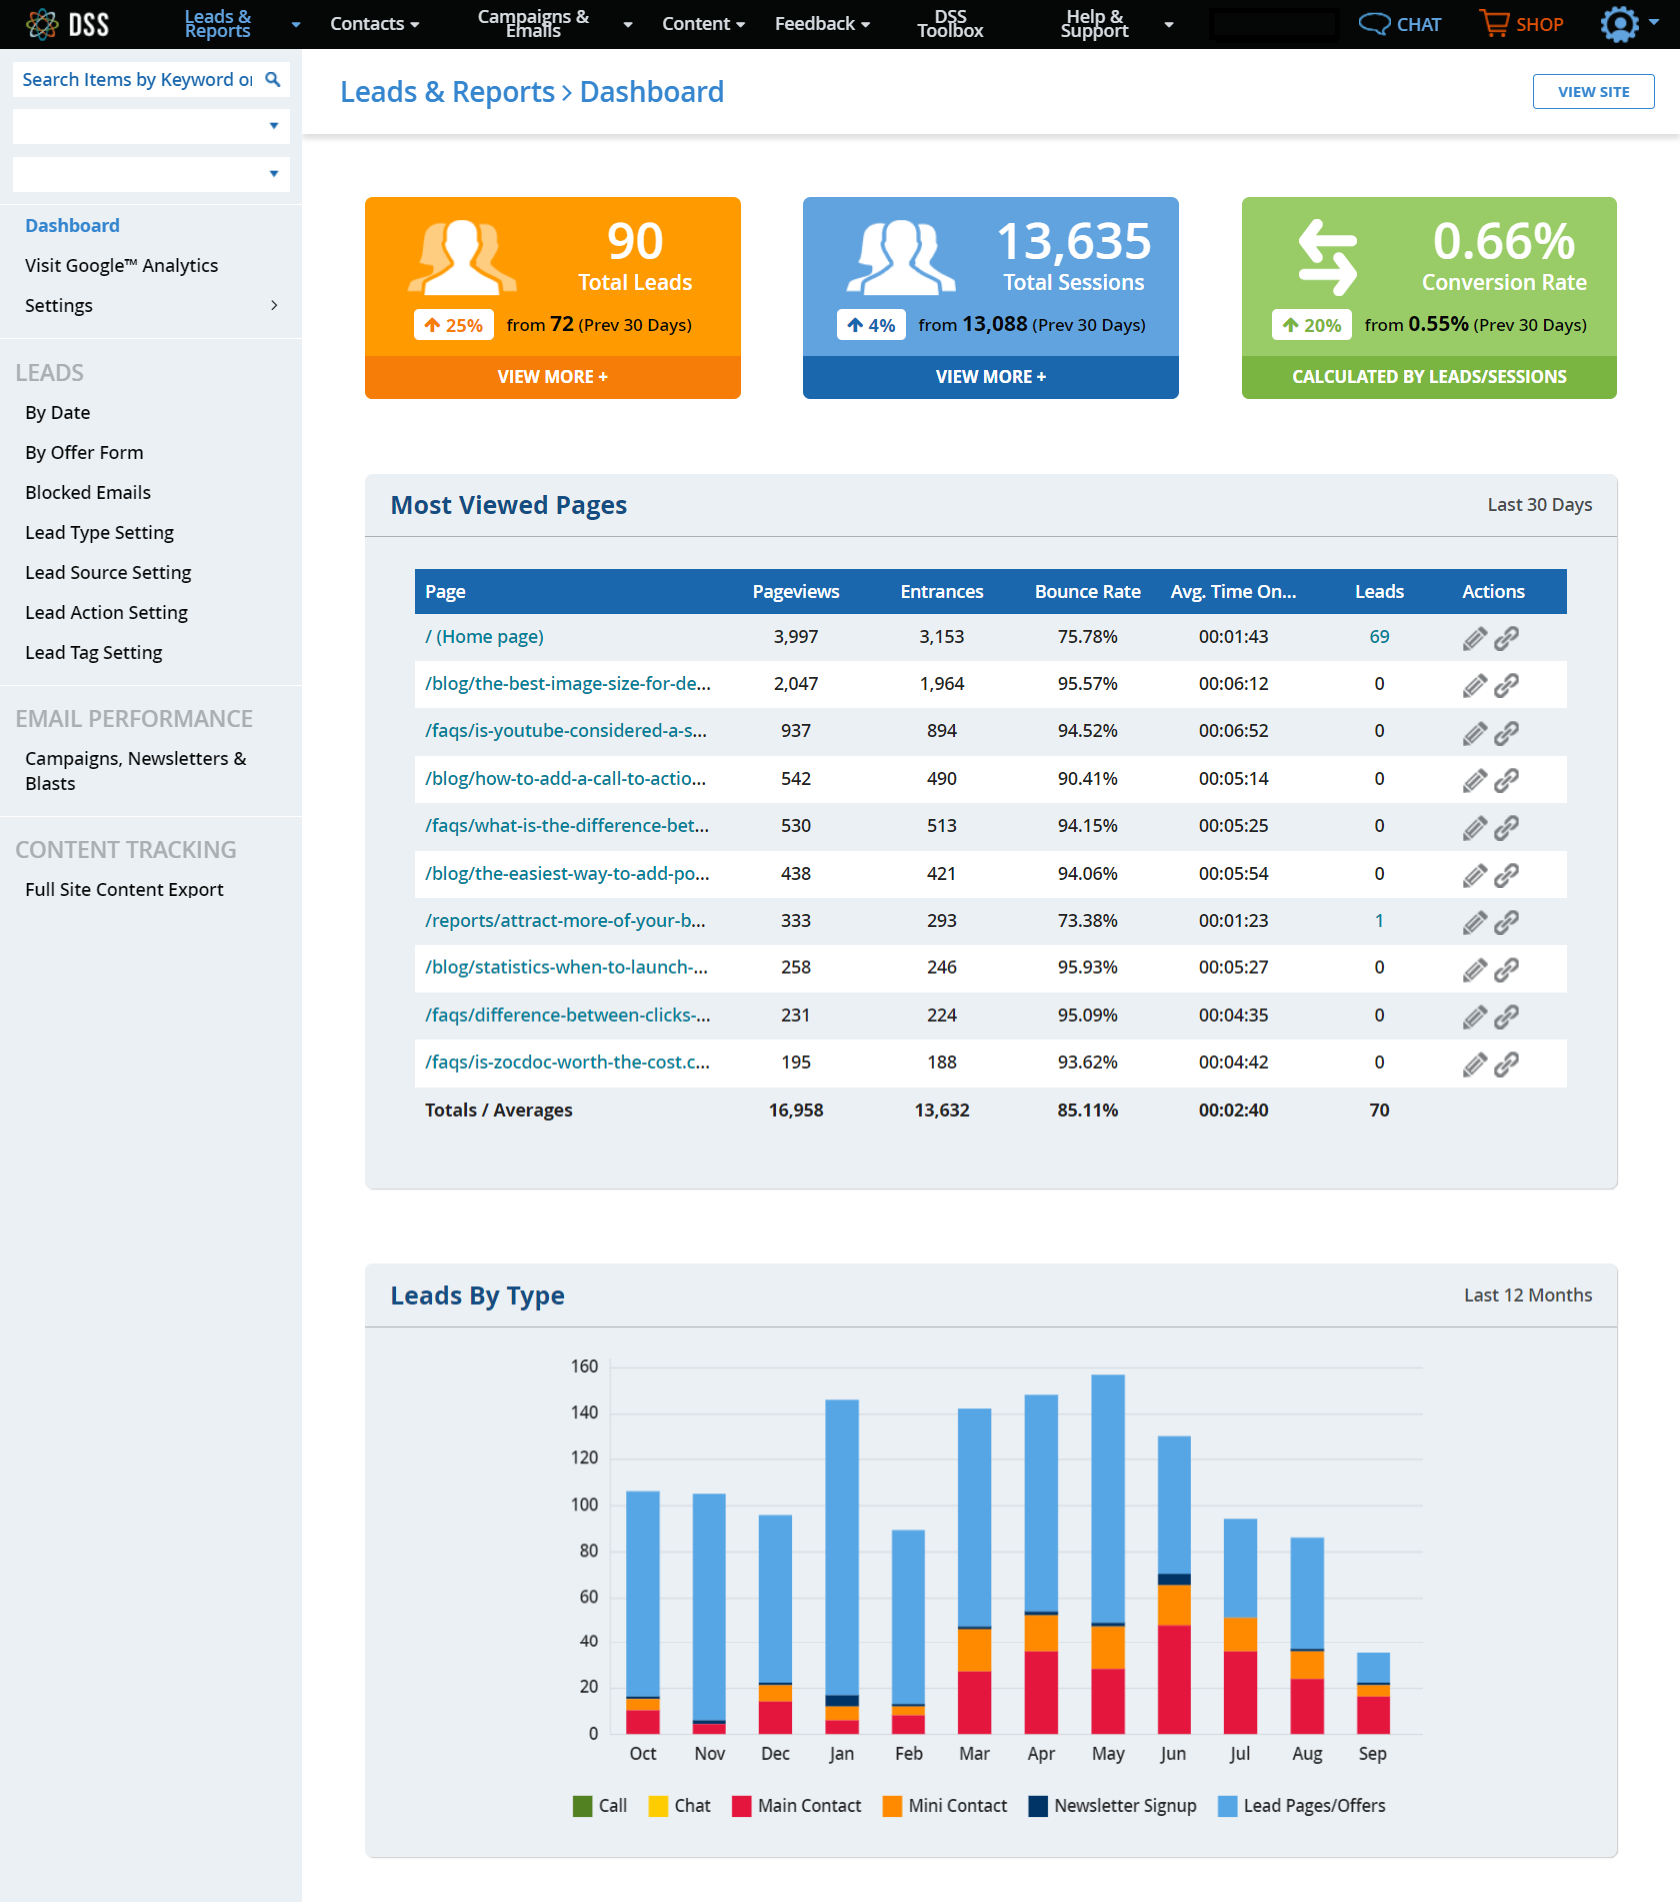 DSS Lead & Reports Dashboard